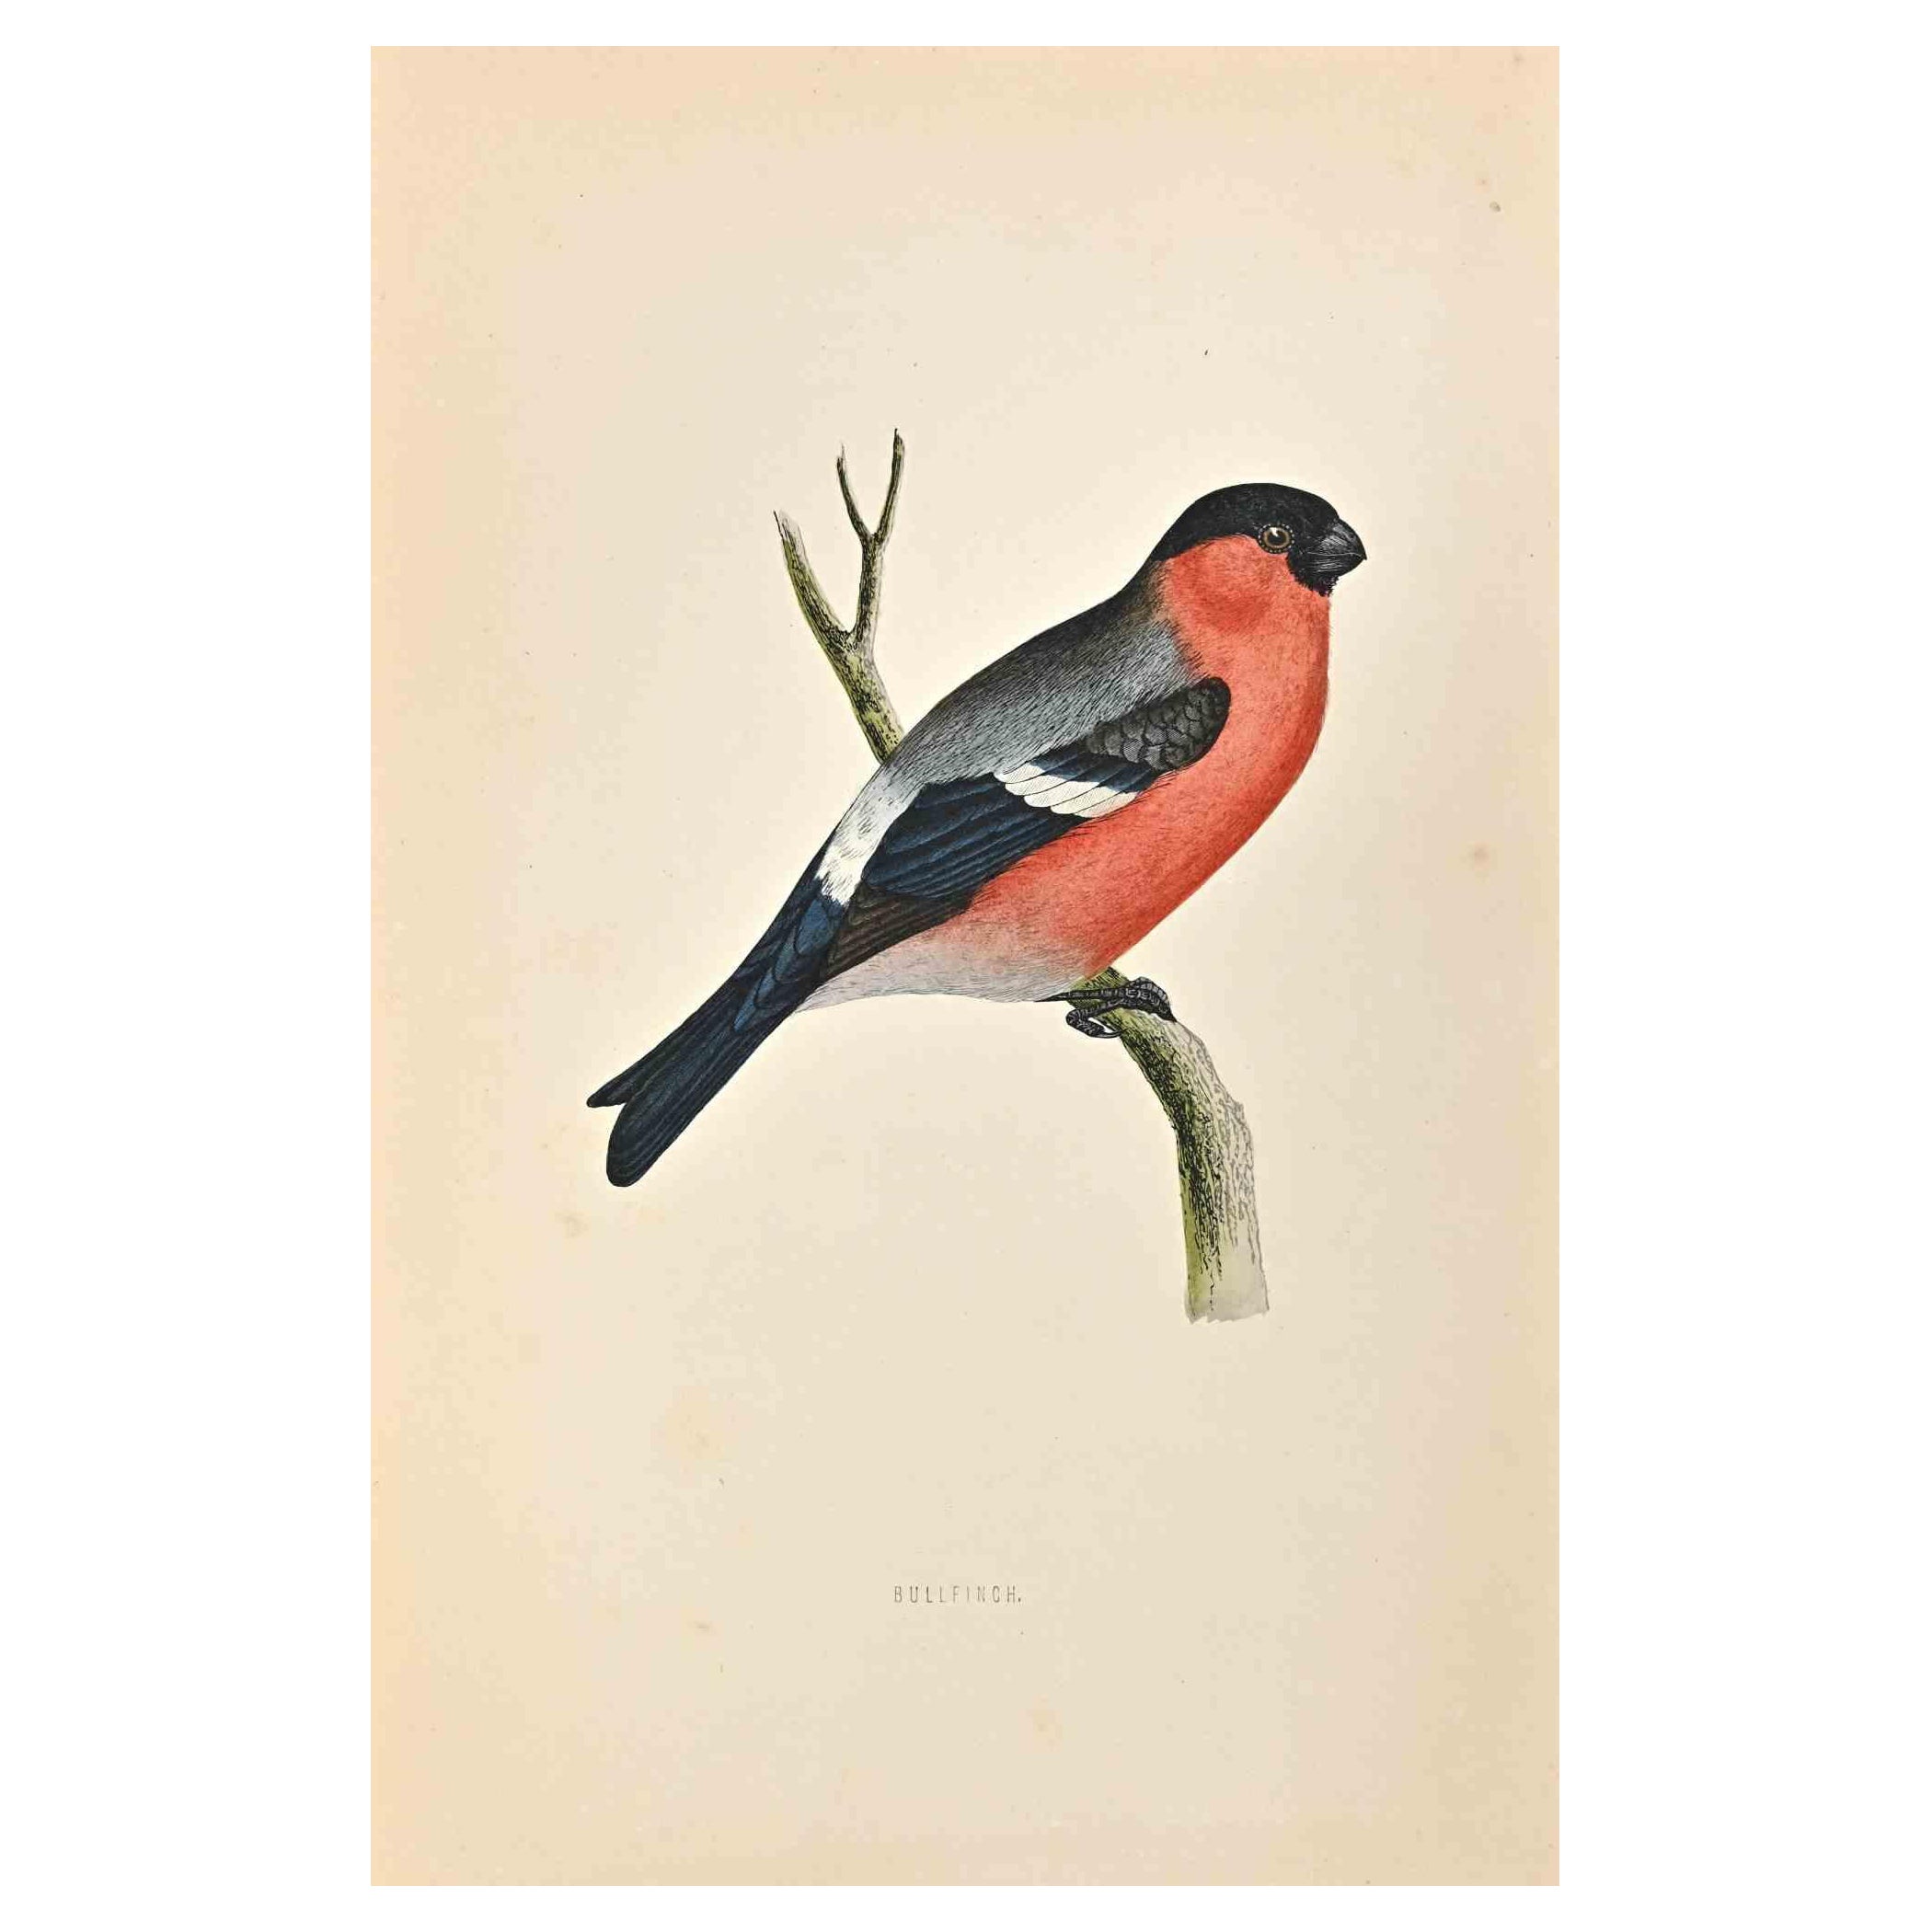 Bullfingh is a modern artwork realized in 1870 by the British artist Alexander Francis Lydon (1836-1917) . 

Woodcut print, hand colored, published by London, Bell & Sons, 1870.  Name of the bird printed in plate. This work is part of a print suite